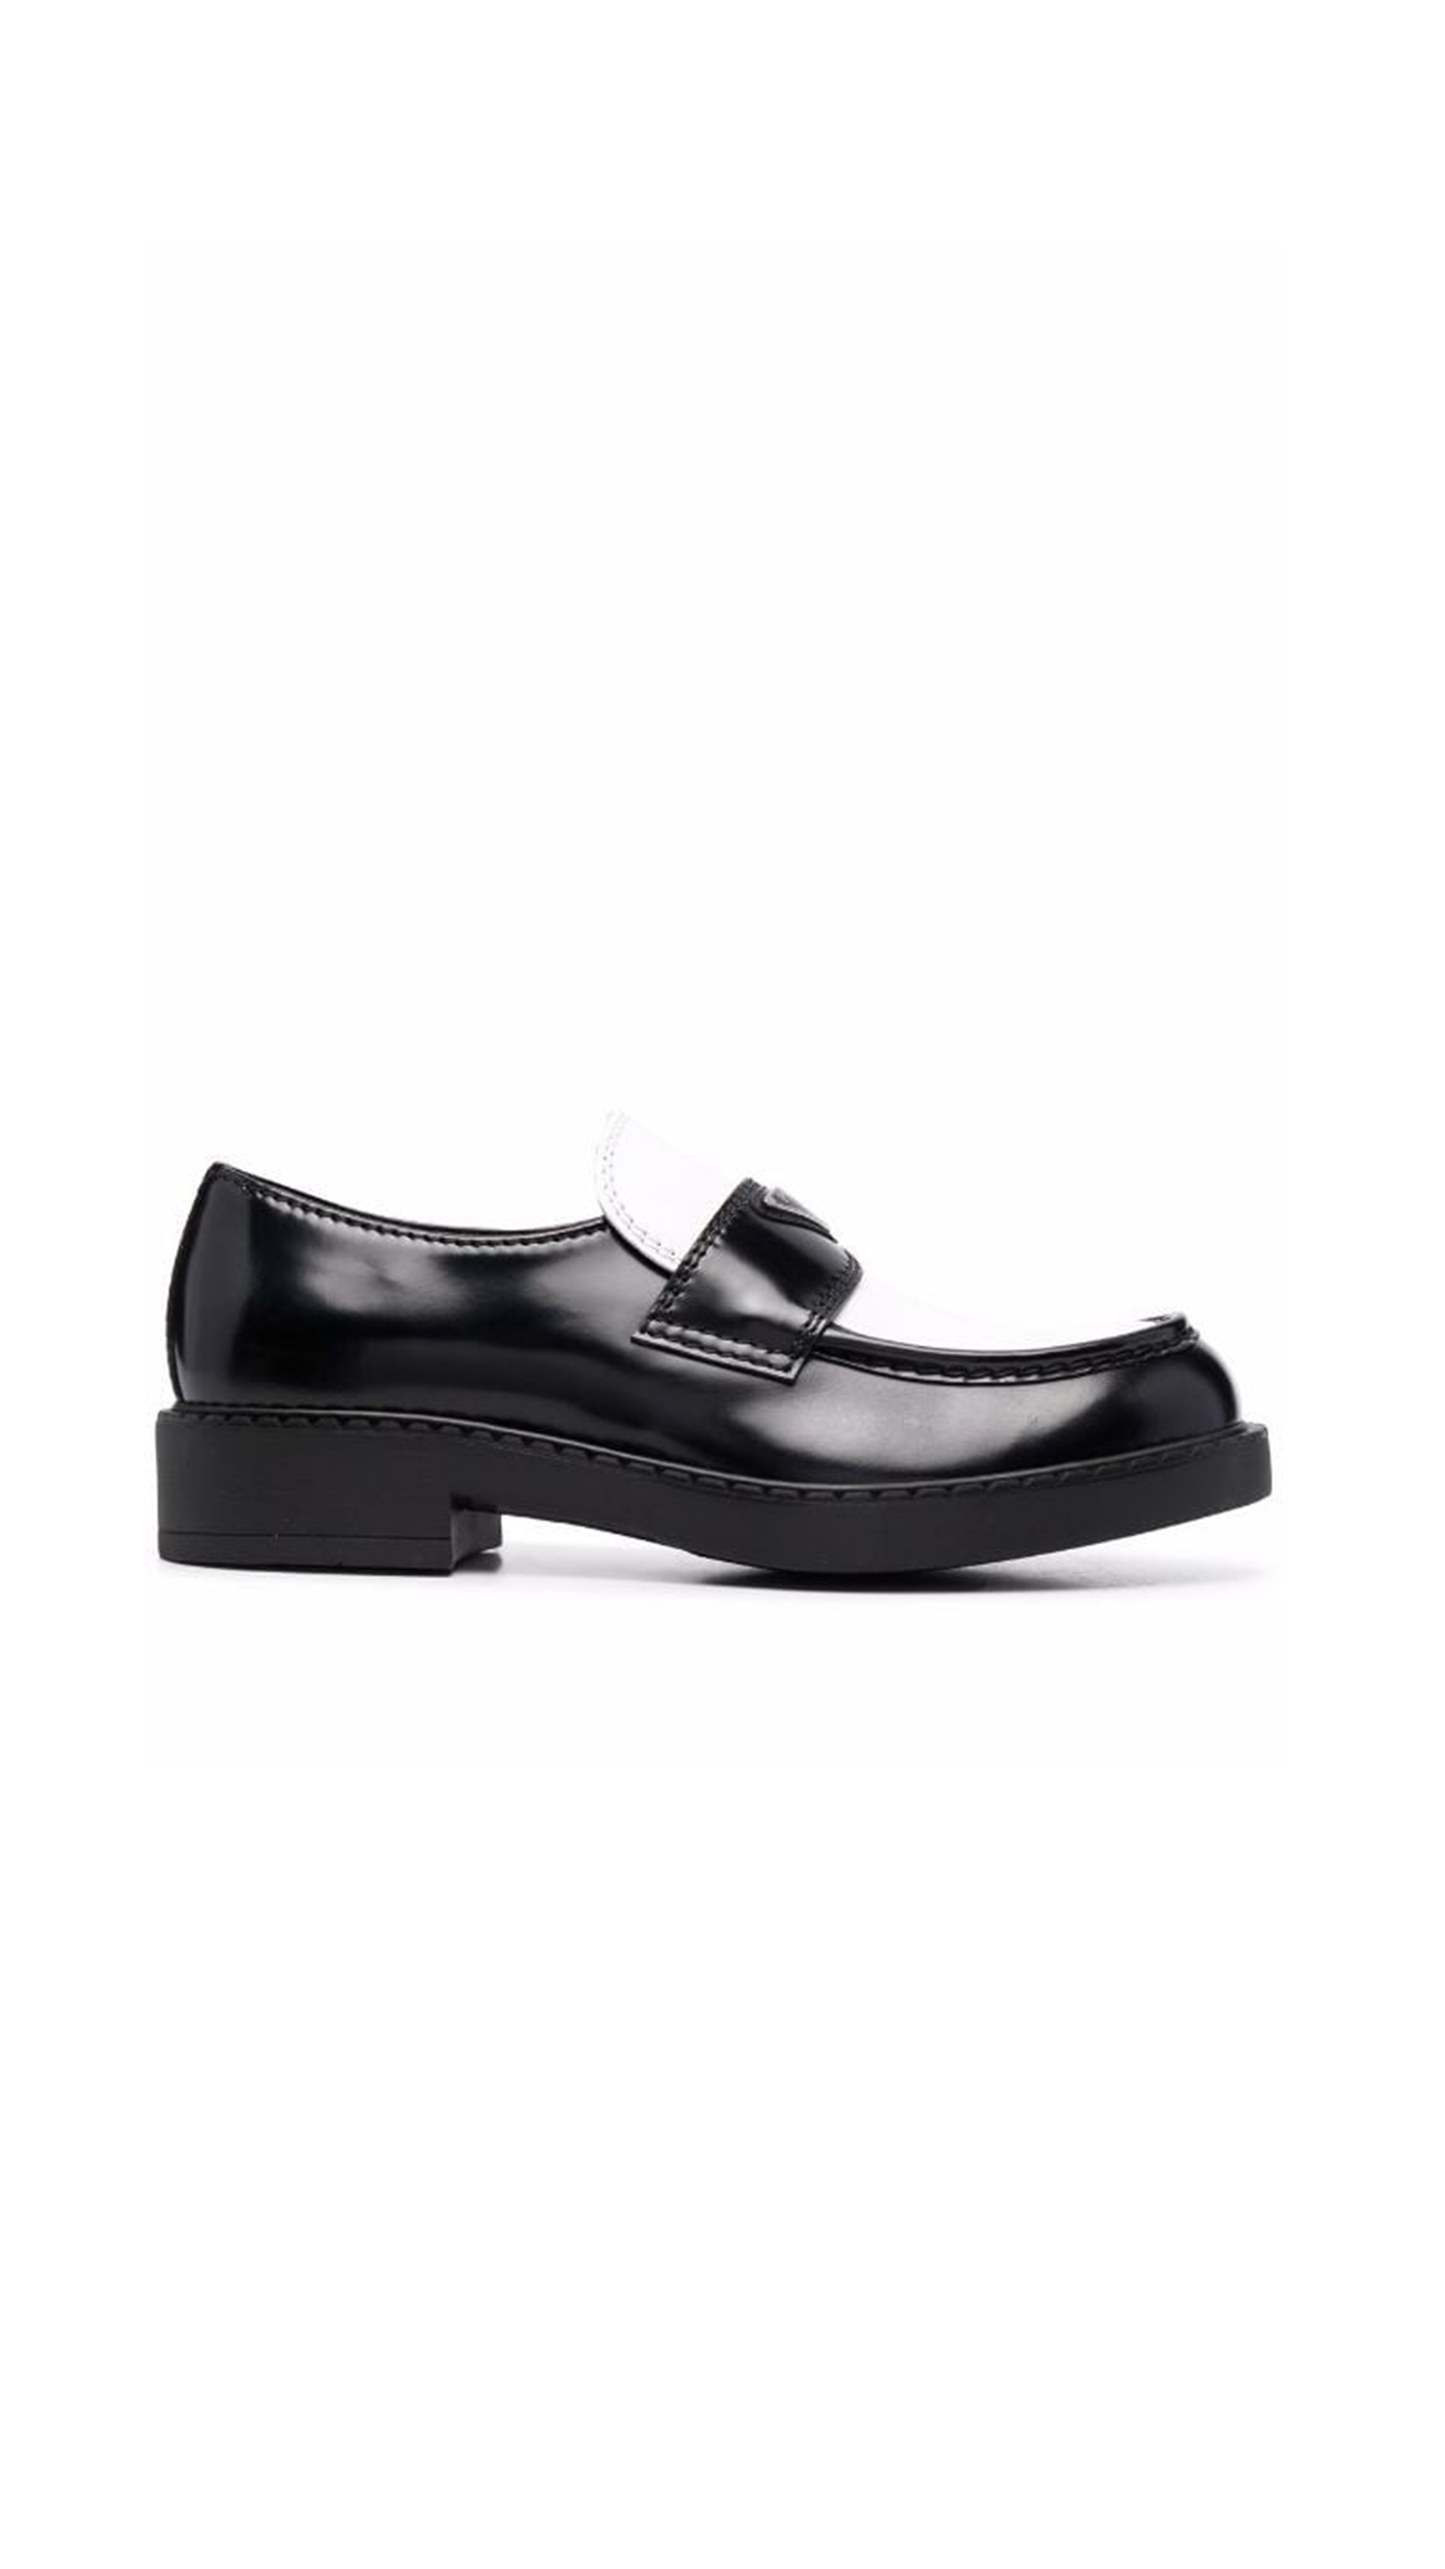 Chocolate Brushed Leather Loafers - Black / White